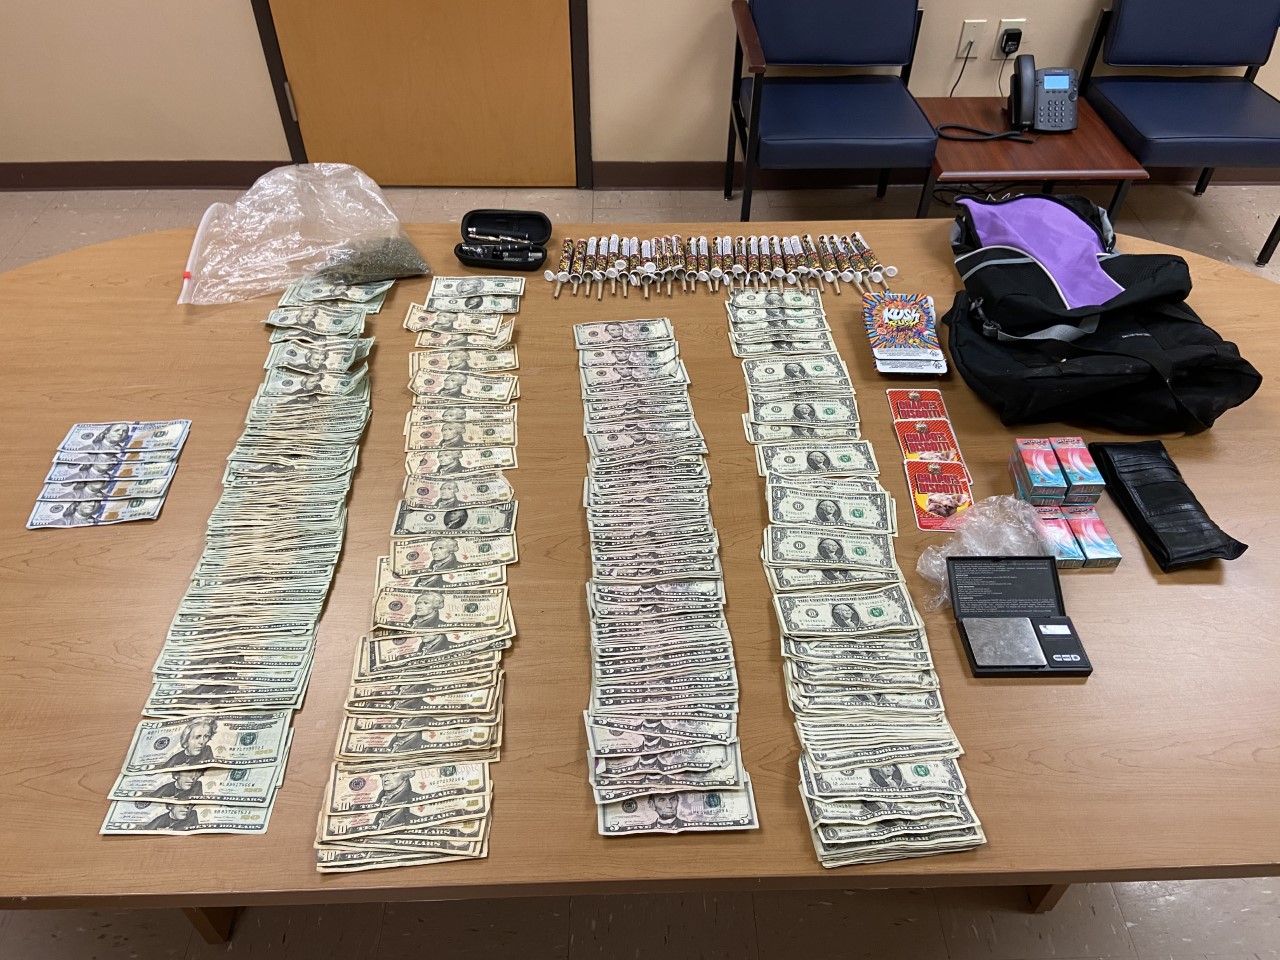 large amount of cash and drugs fanned out on a wooden table top